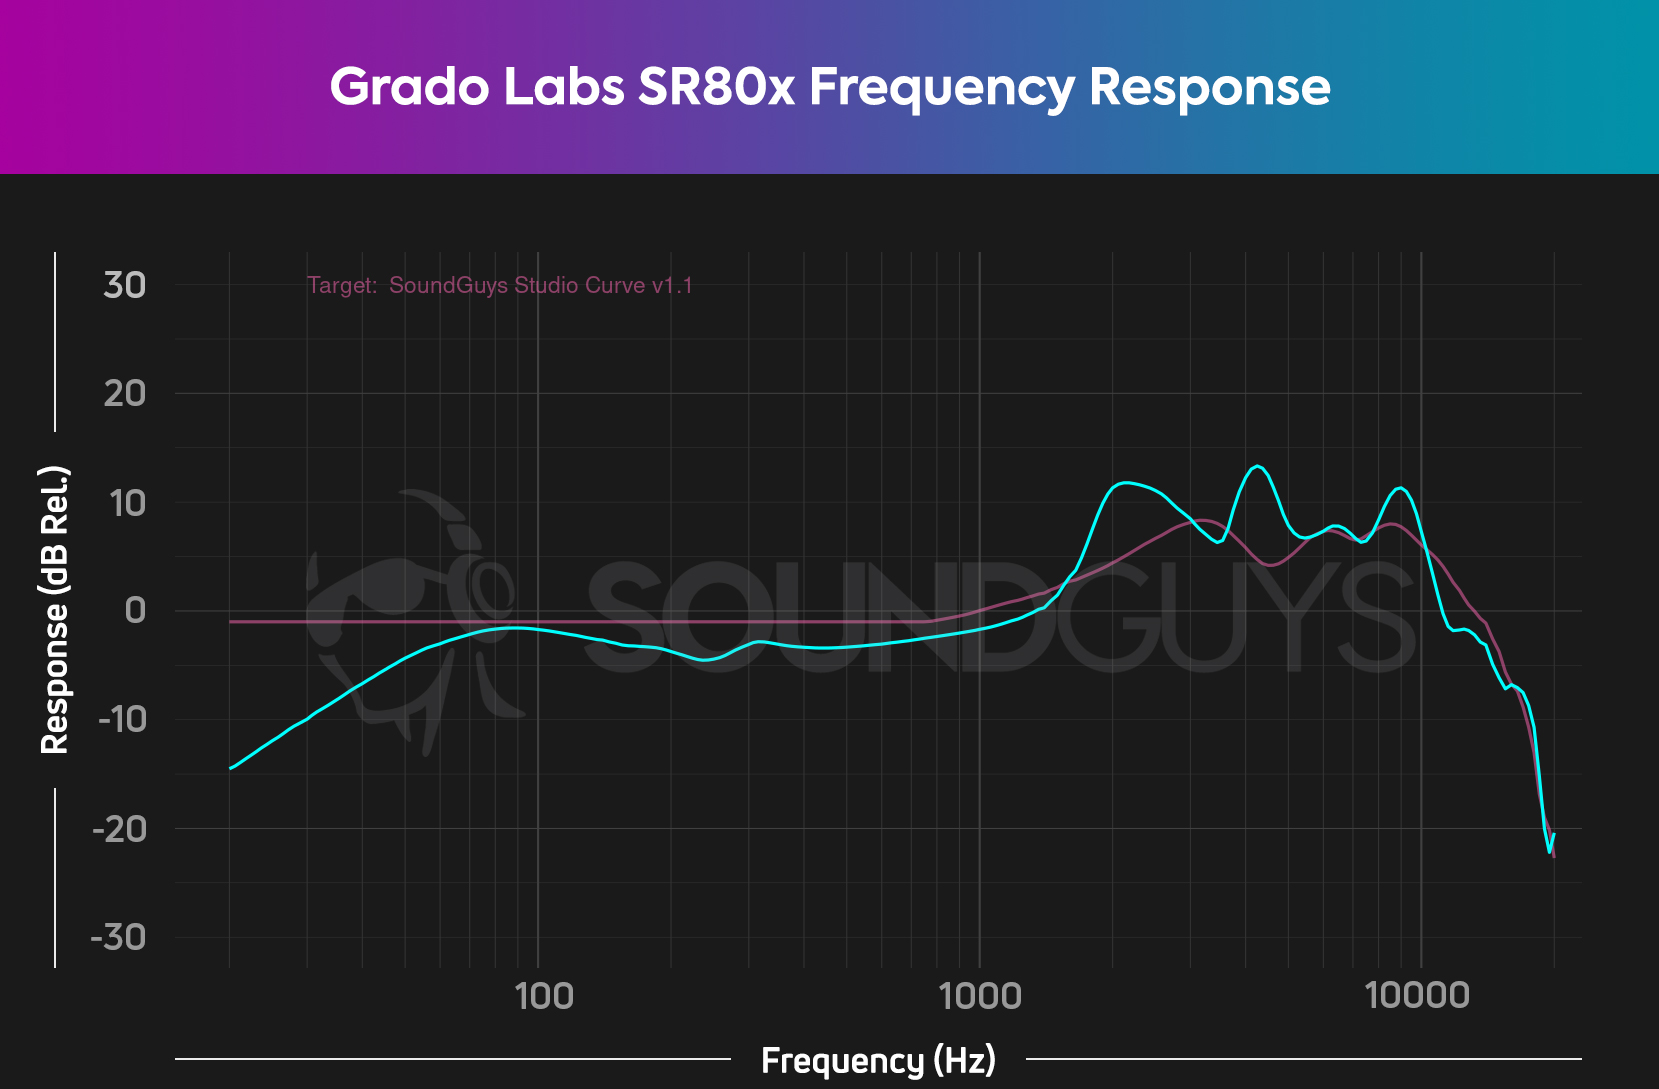 Chart depicts the Grado Labs SR80x frequency response compared to the SoundGuys ideal studio frequency response.